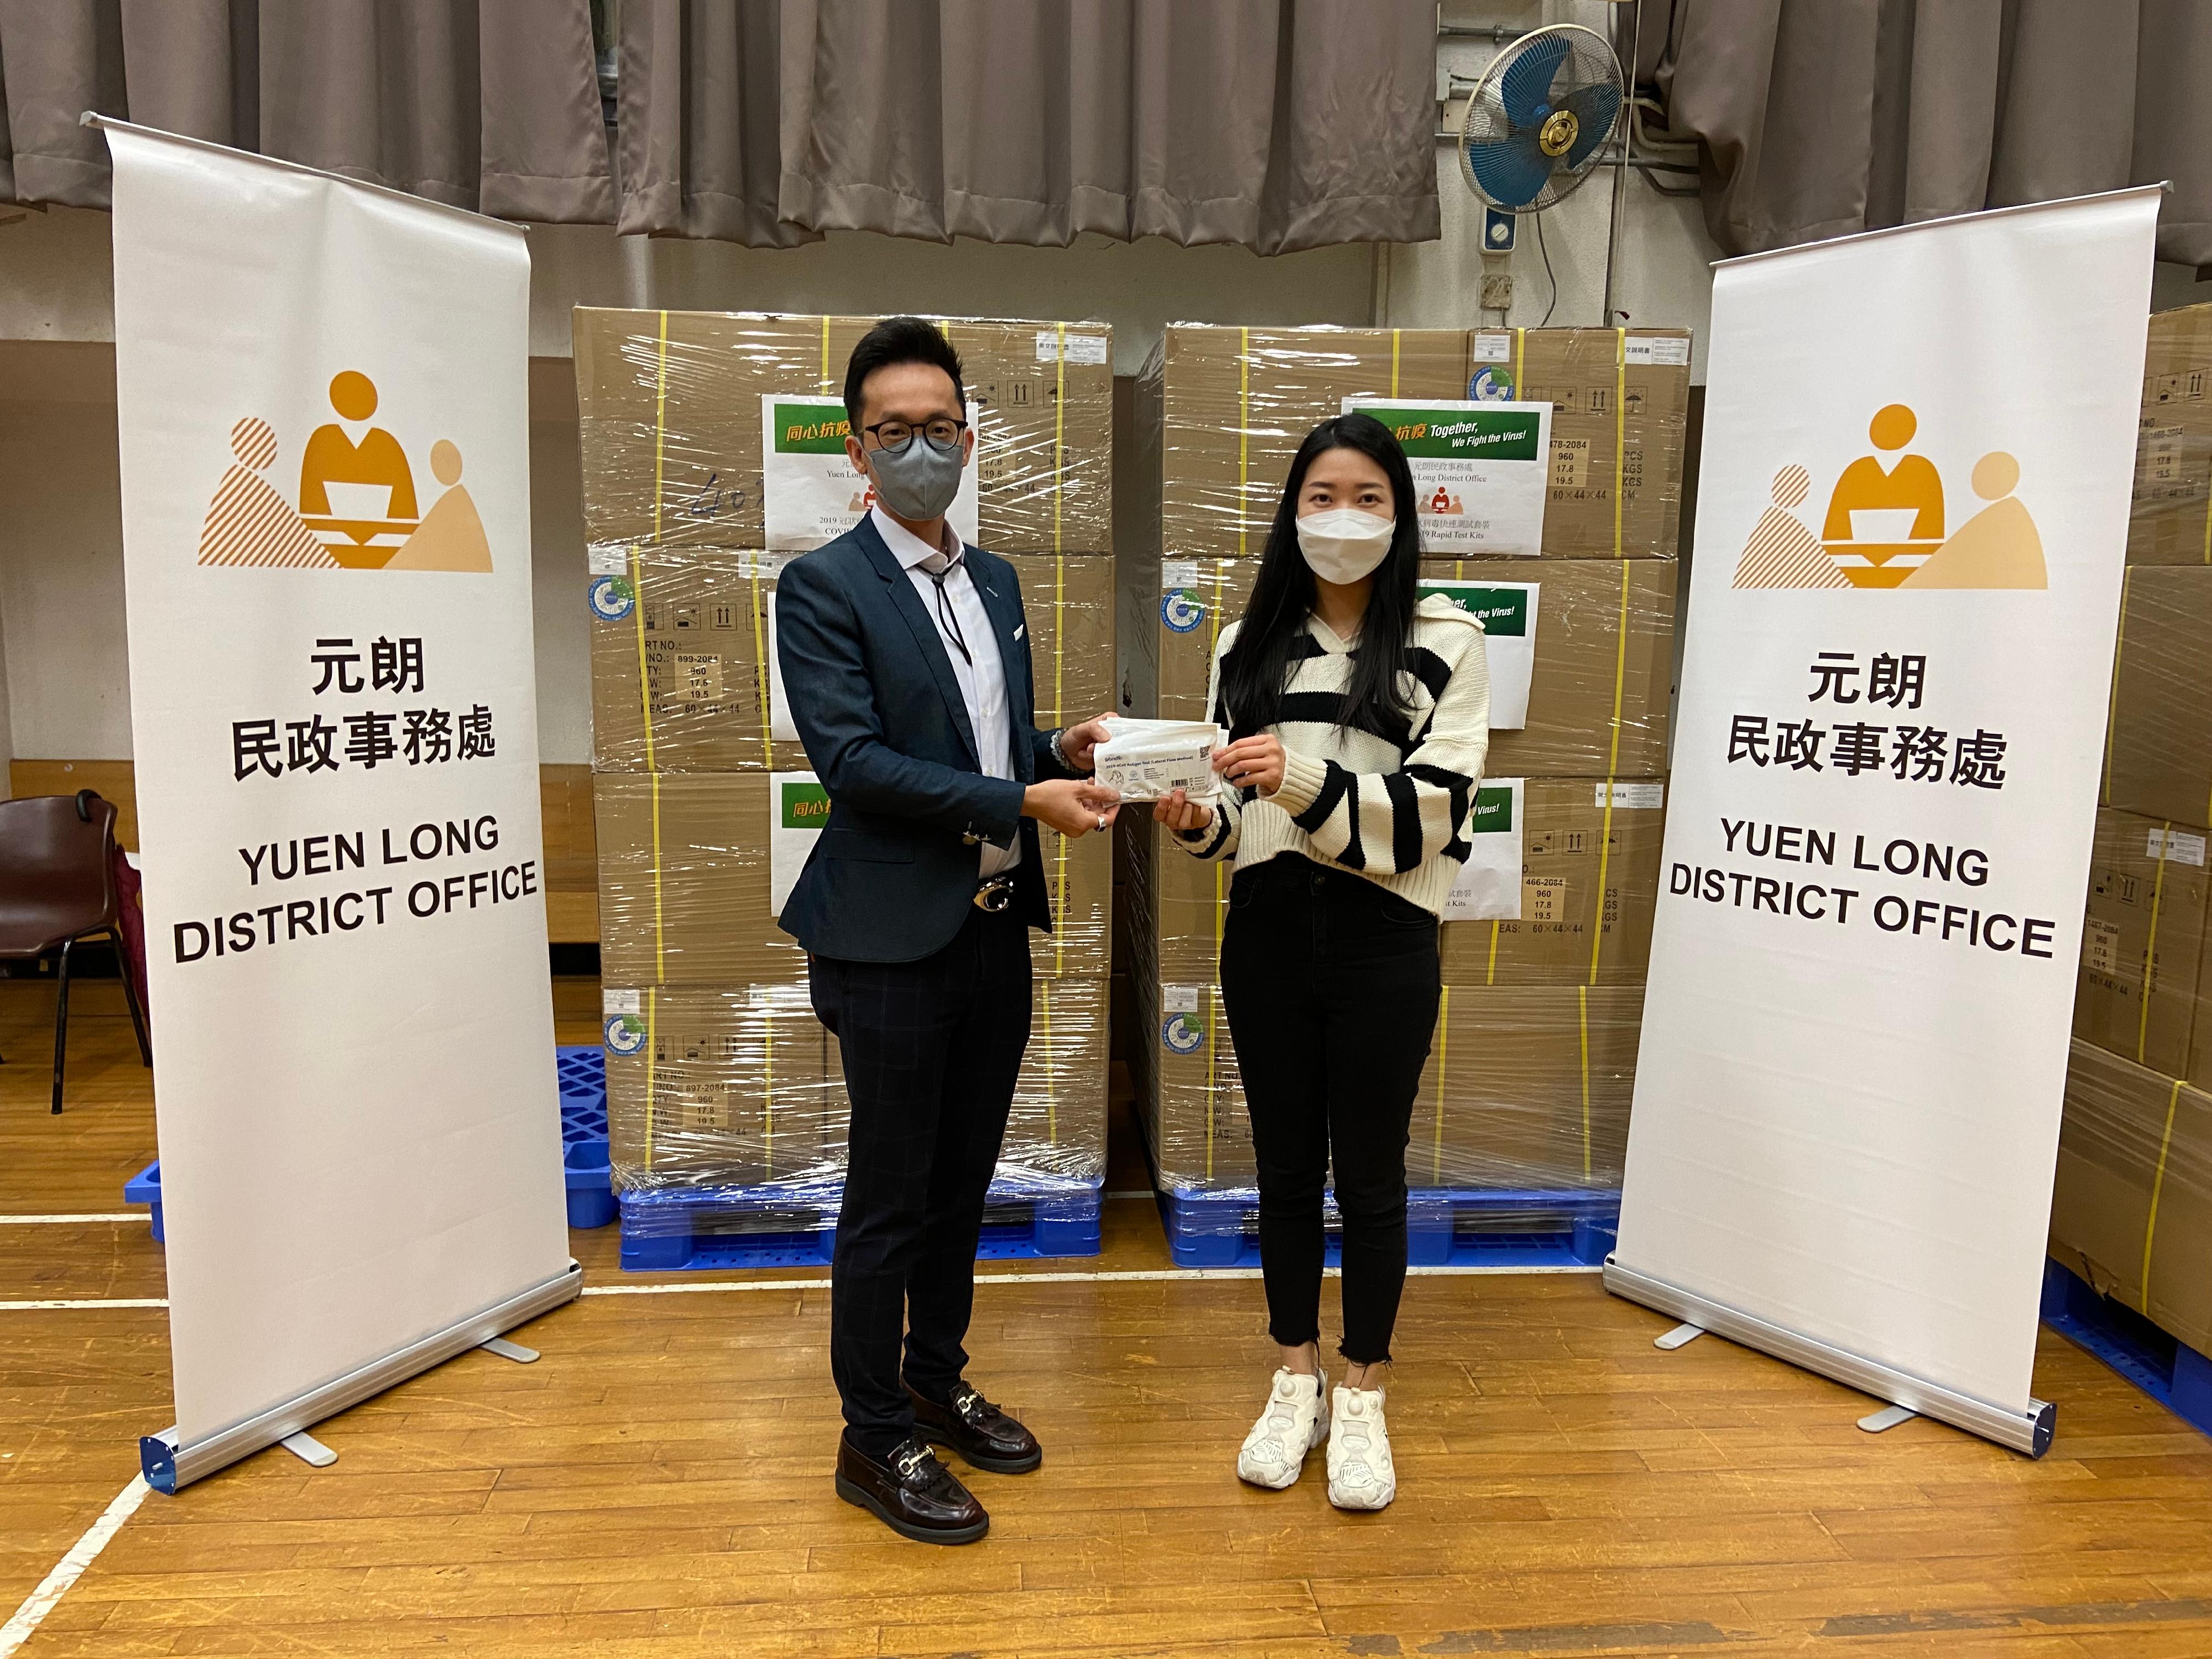 The Yuen Long District Office today (March 24) distributed COVID-19 rapid test kits to households, cleansing workers and property management staff living and working in Locwood Court of Kingswood Villas for voluntary testing through the property management company.